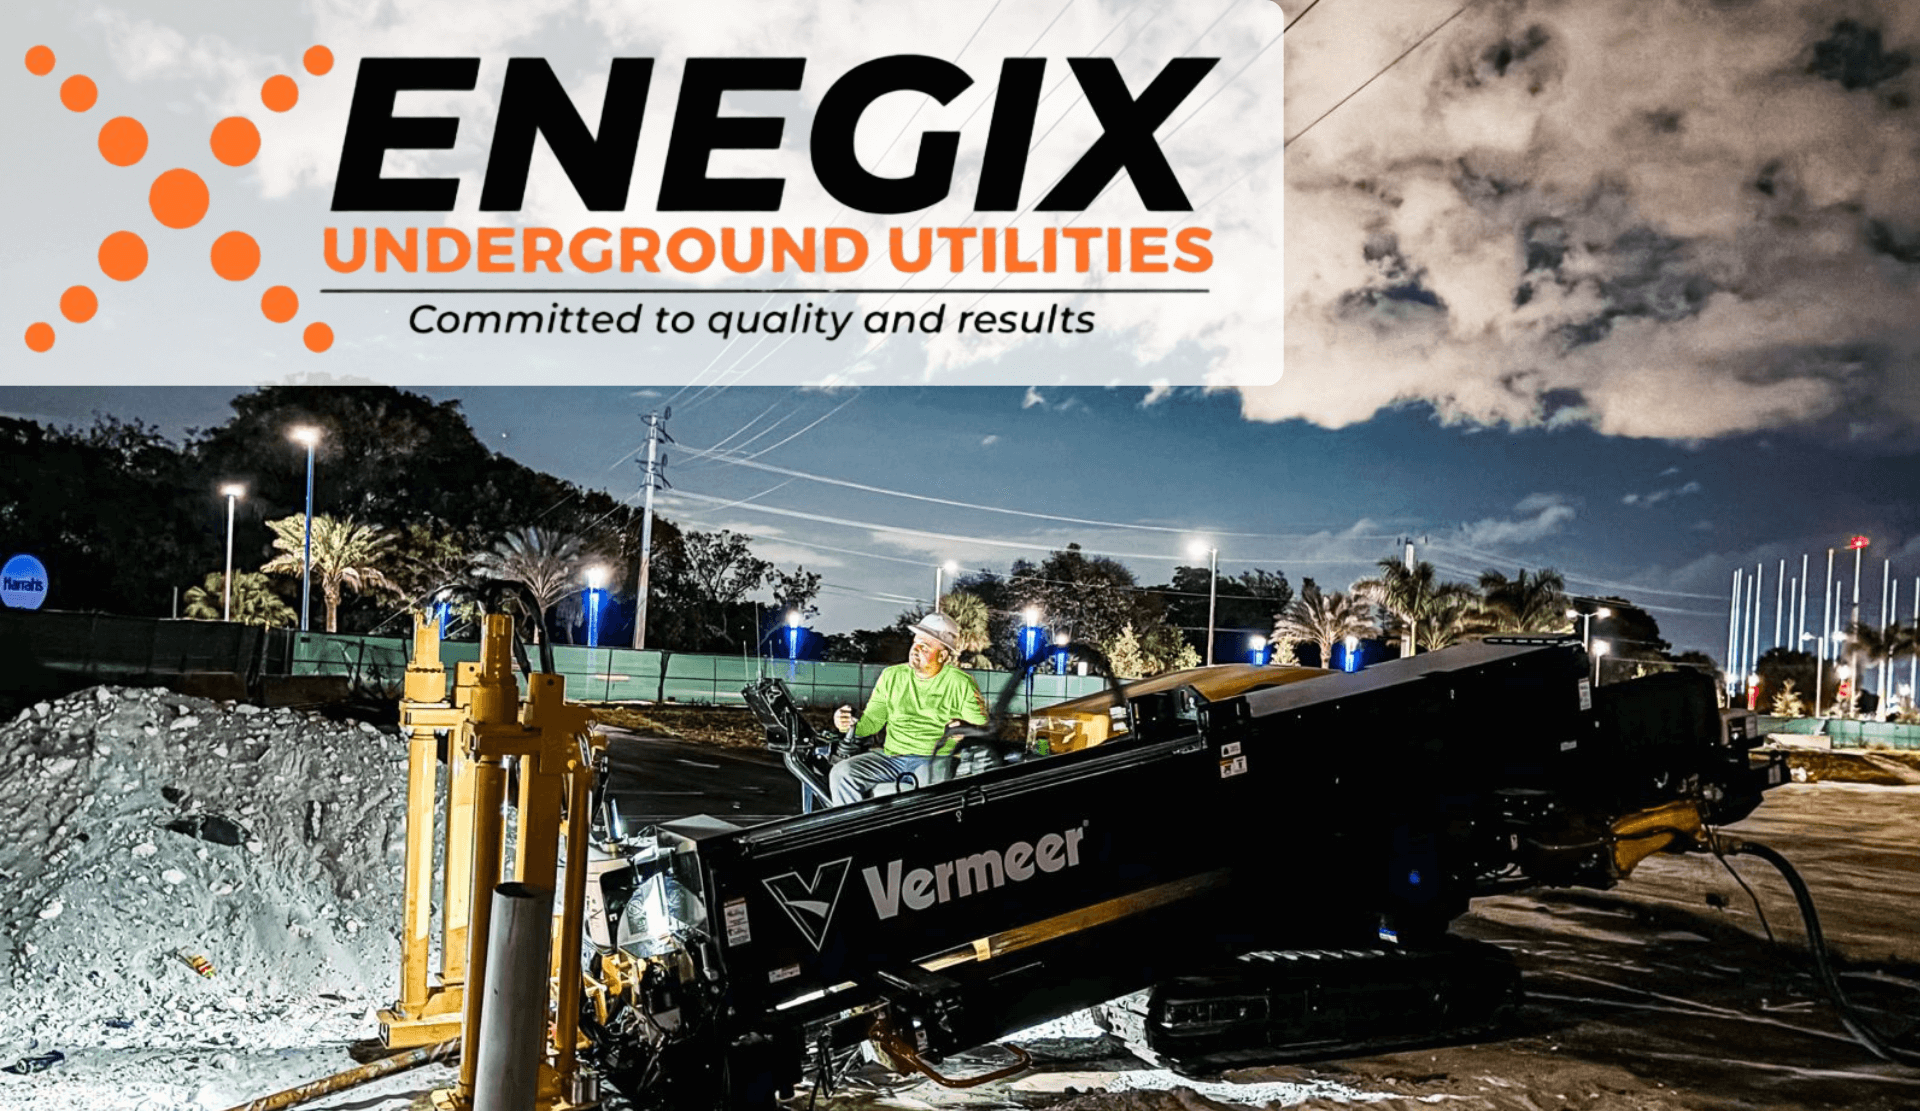 Stages of Horizontal Directional Drilling: Enegix Florida